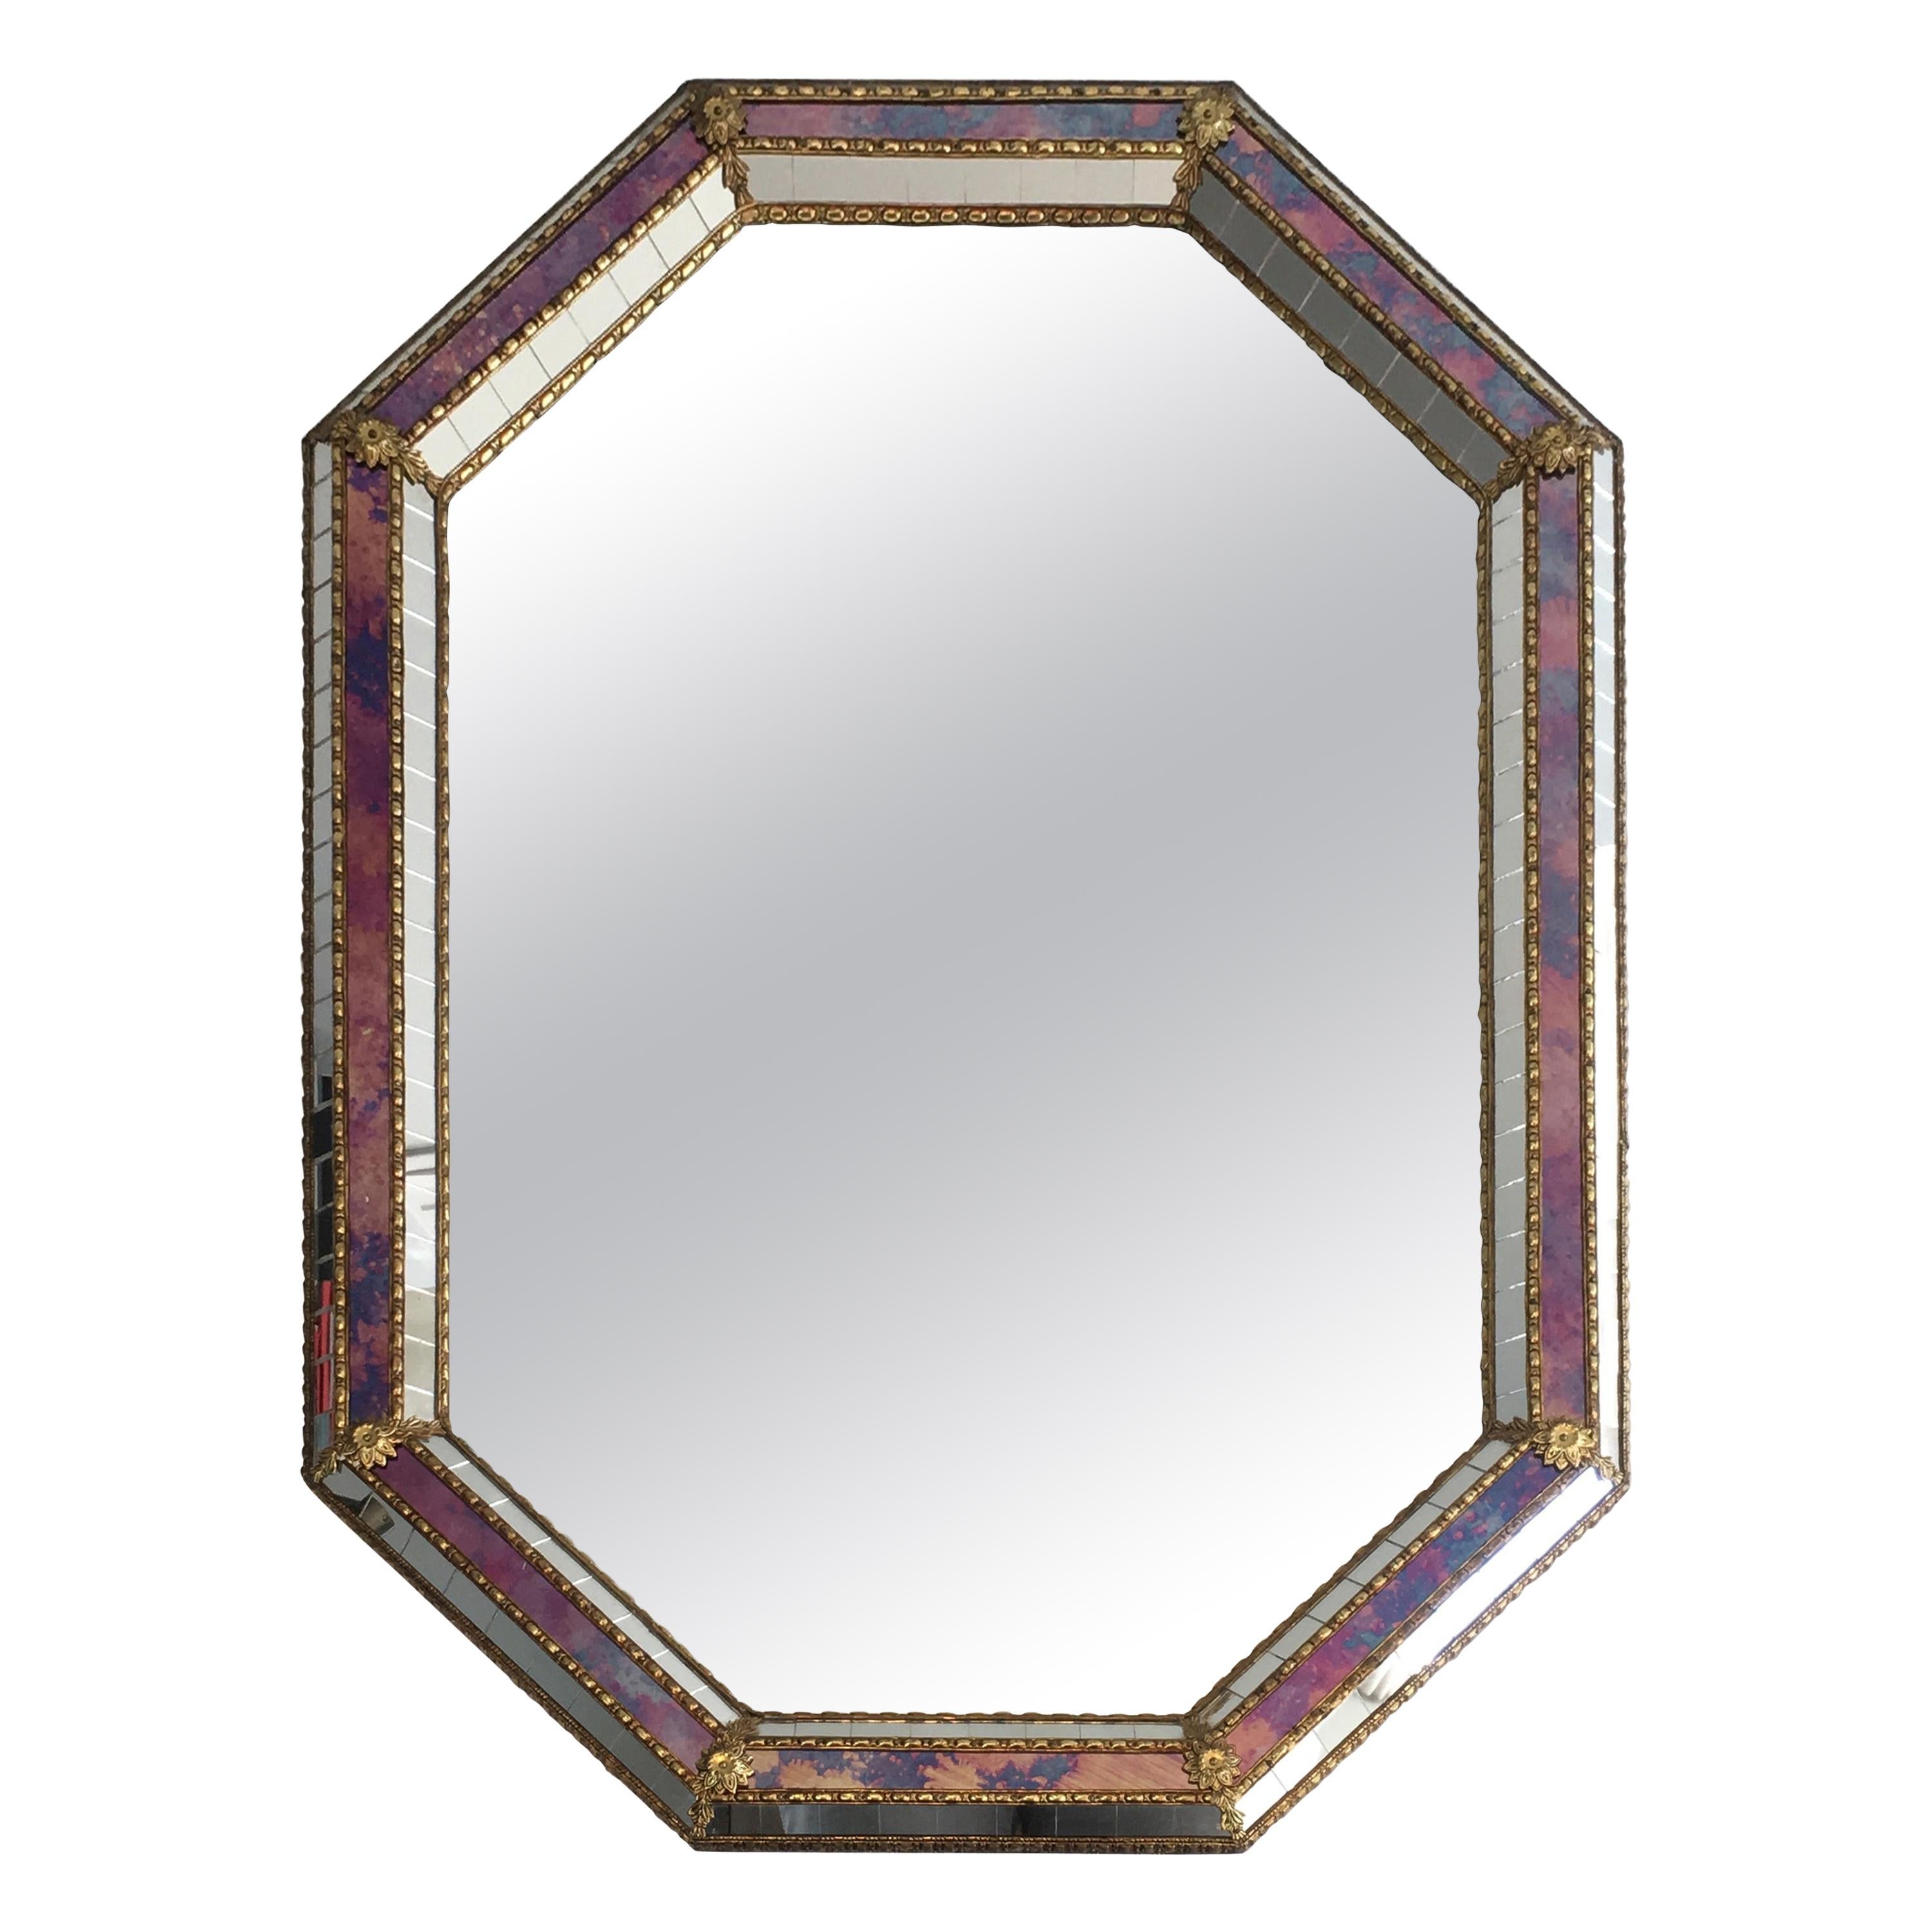 Octogonal Mirror made of Brass Garlands and Flowers and Mirror Faceted, French